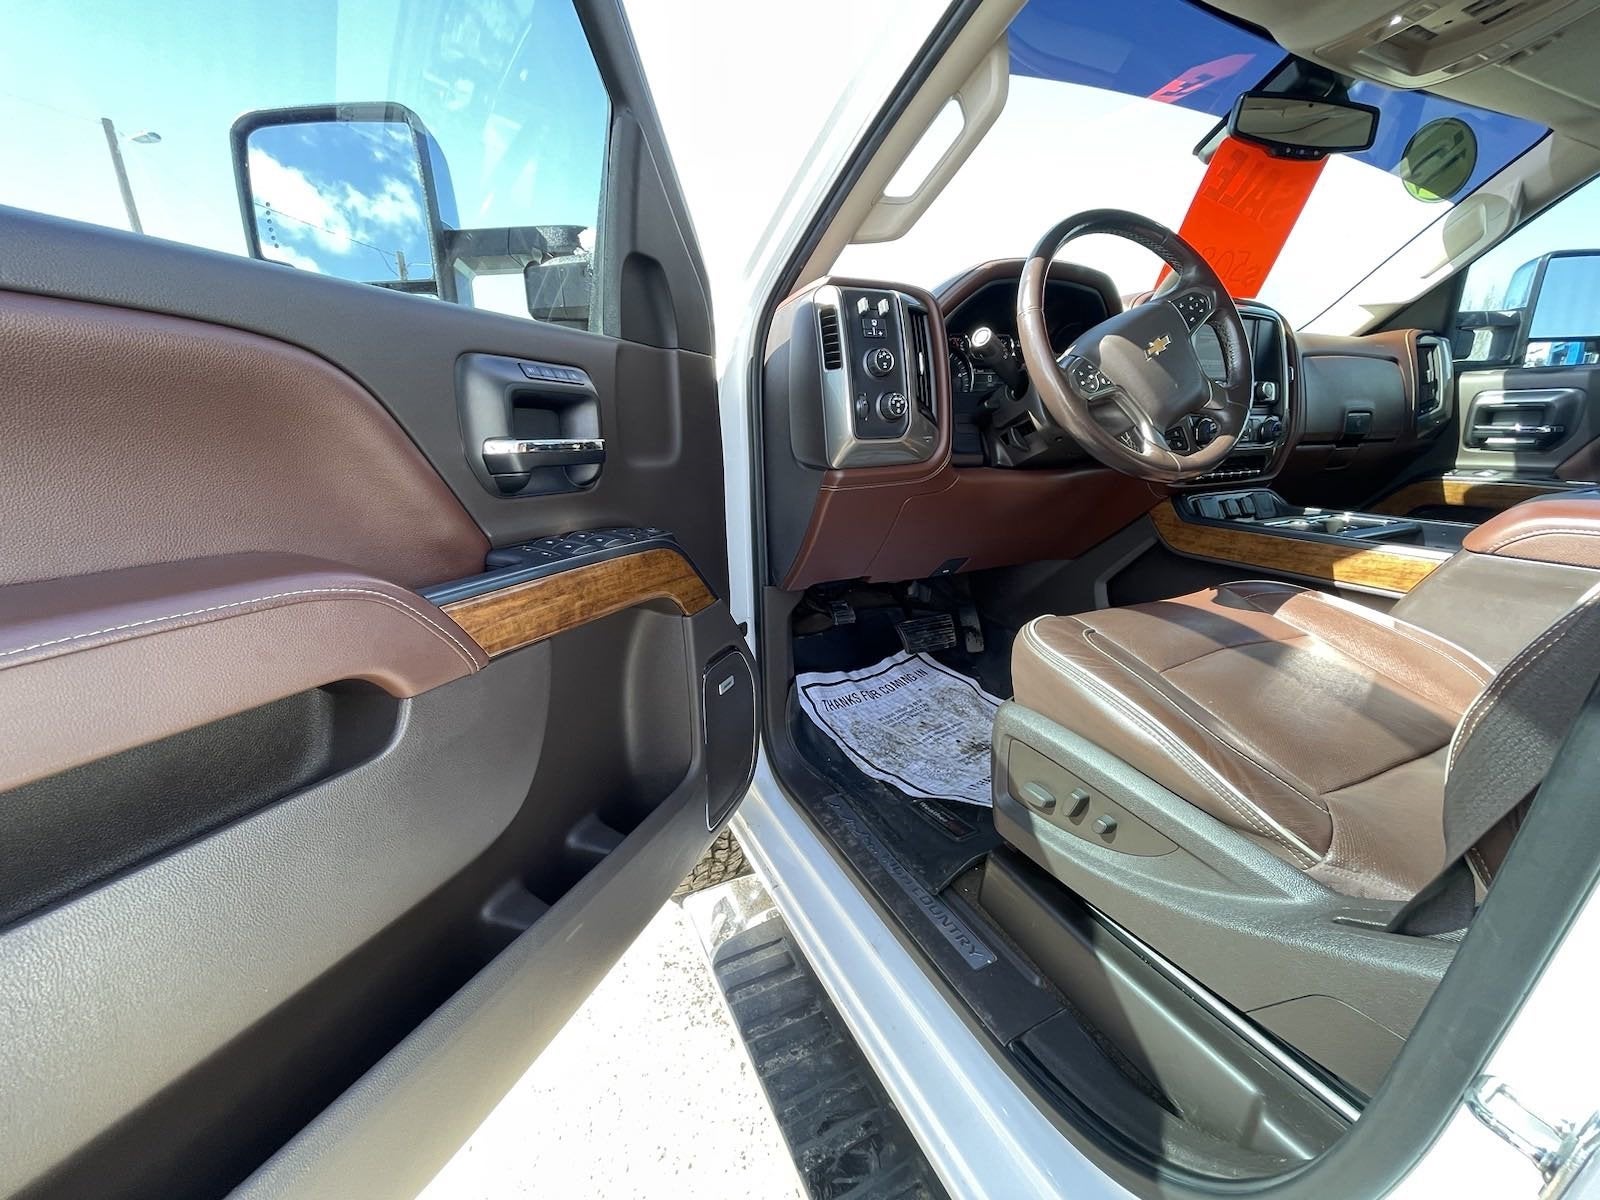 2015 Chevrolet Silverado 3500HD Built After Aug 14 High Country